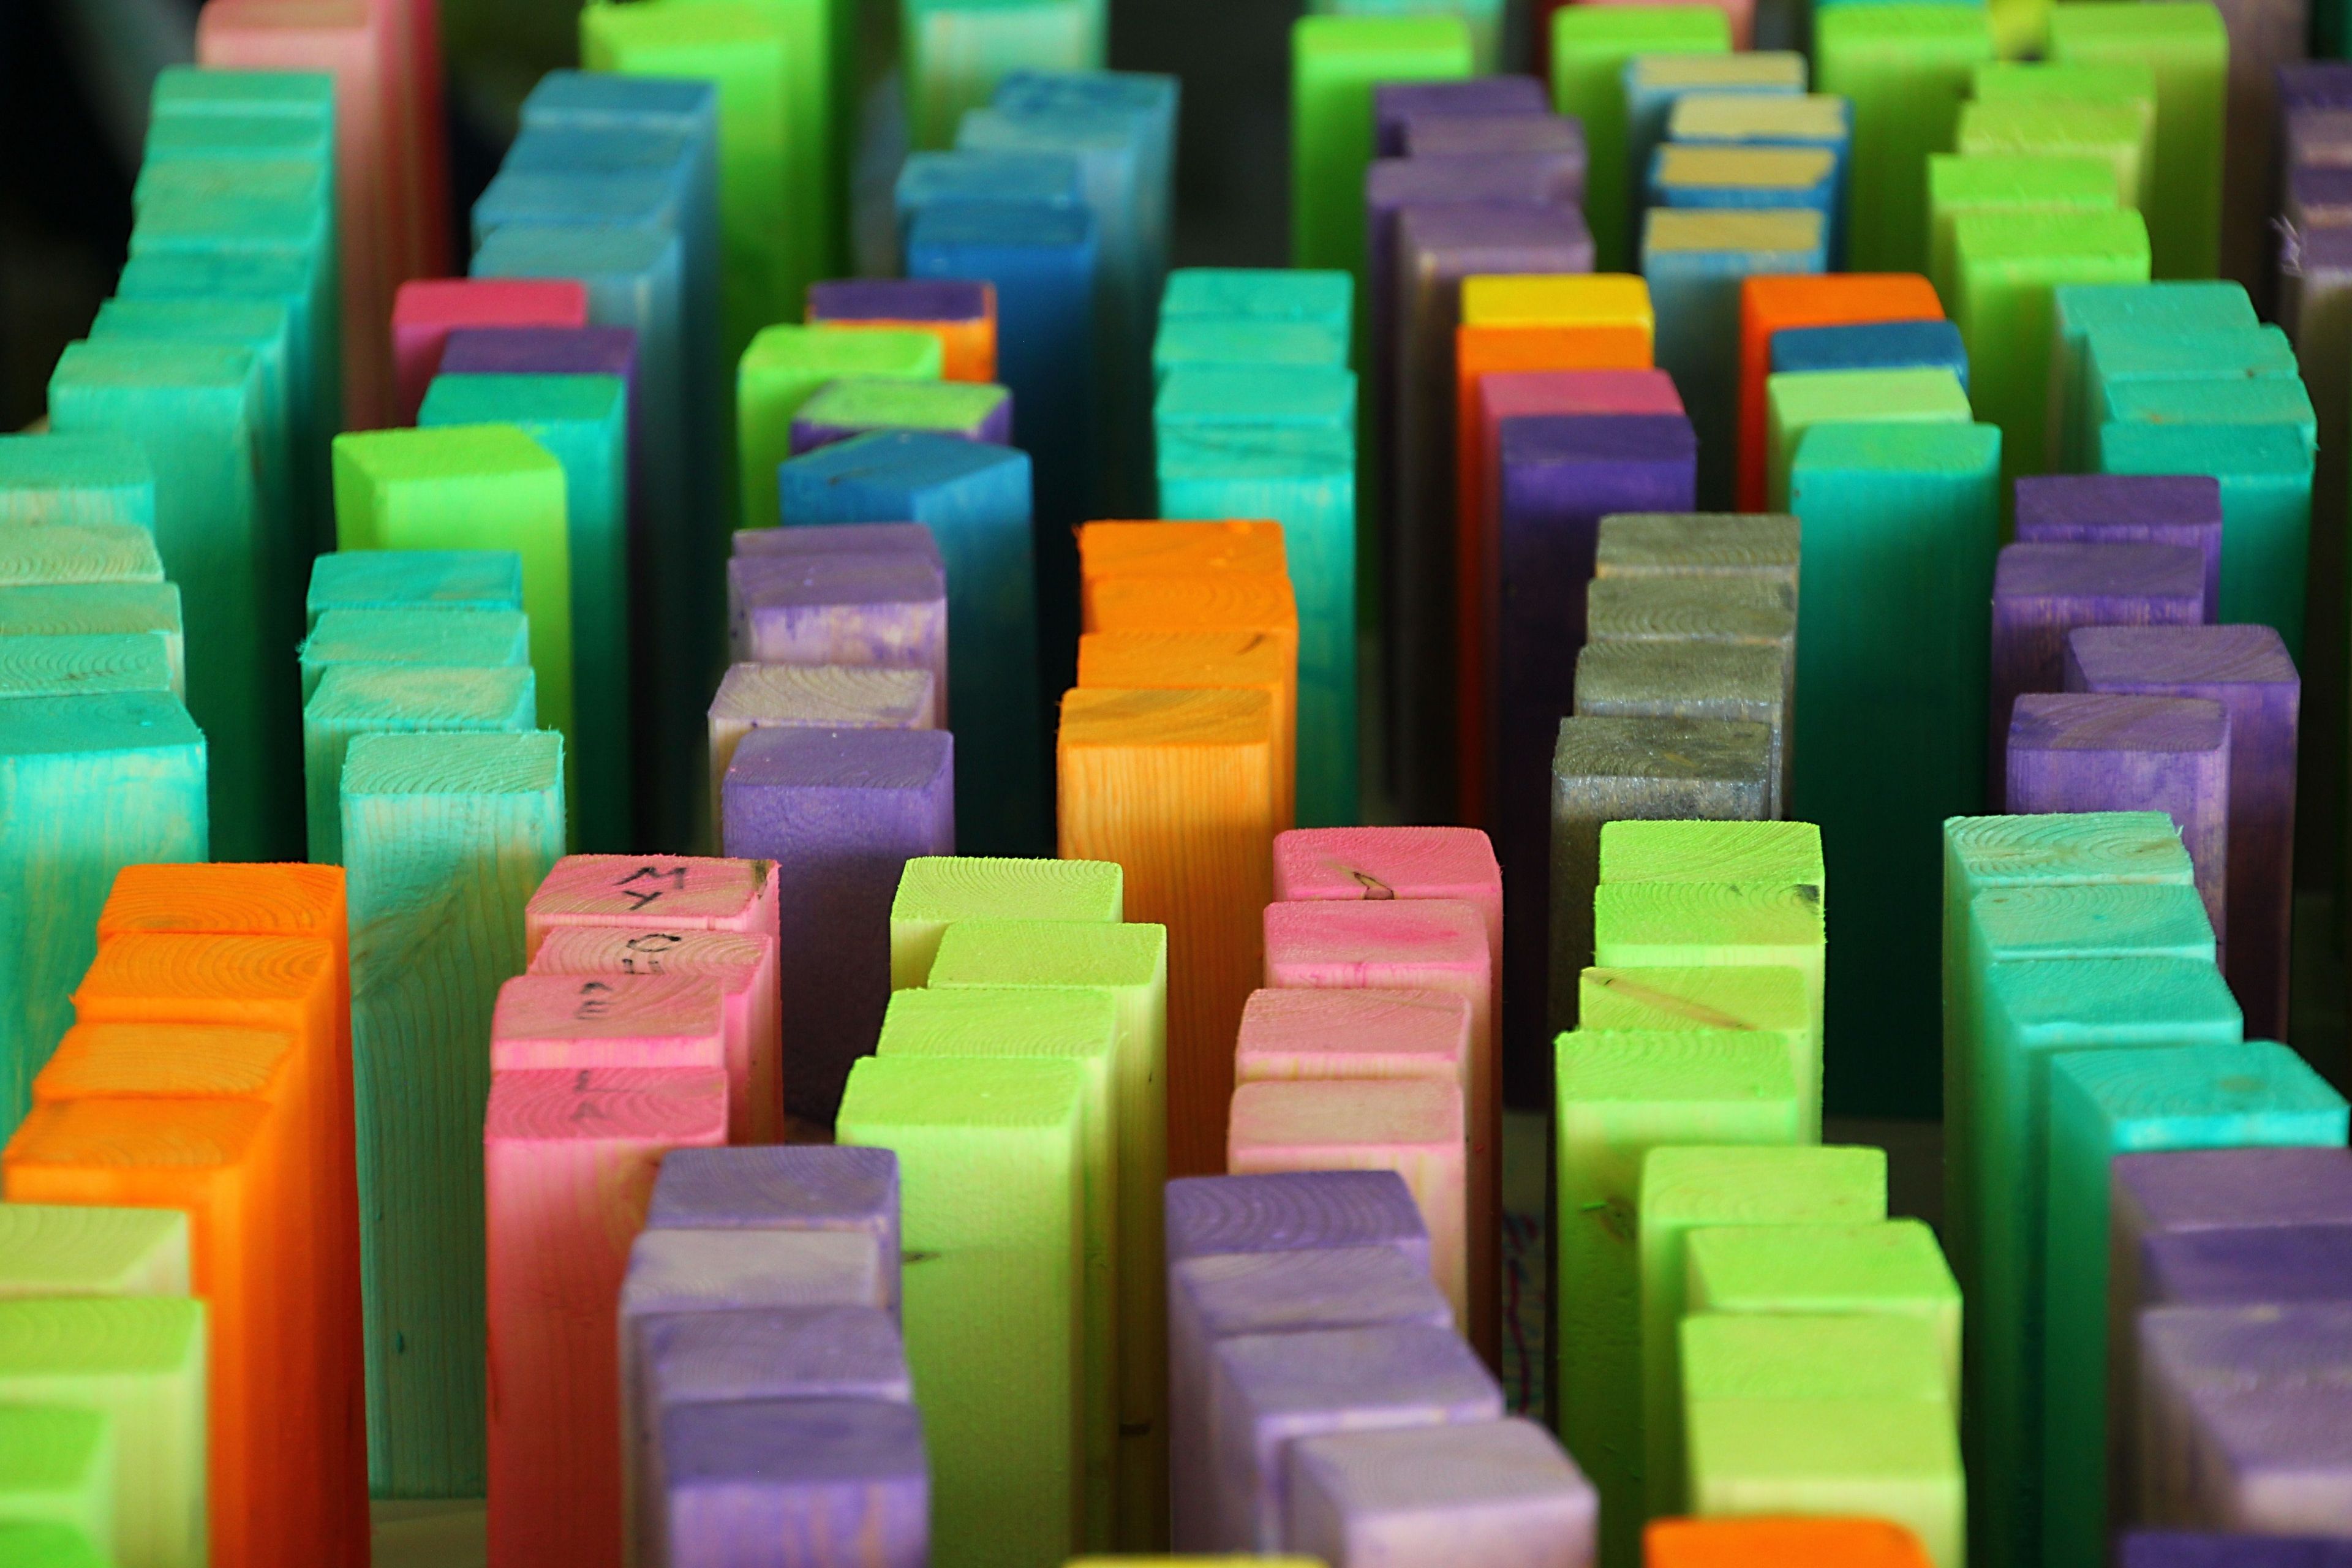 Dozens of wooden blocks painted in a variety of colors.